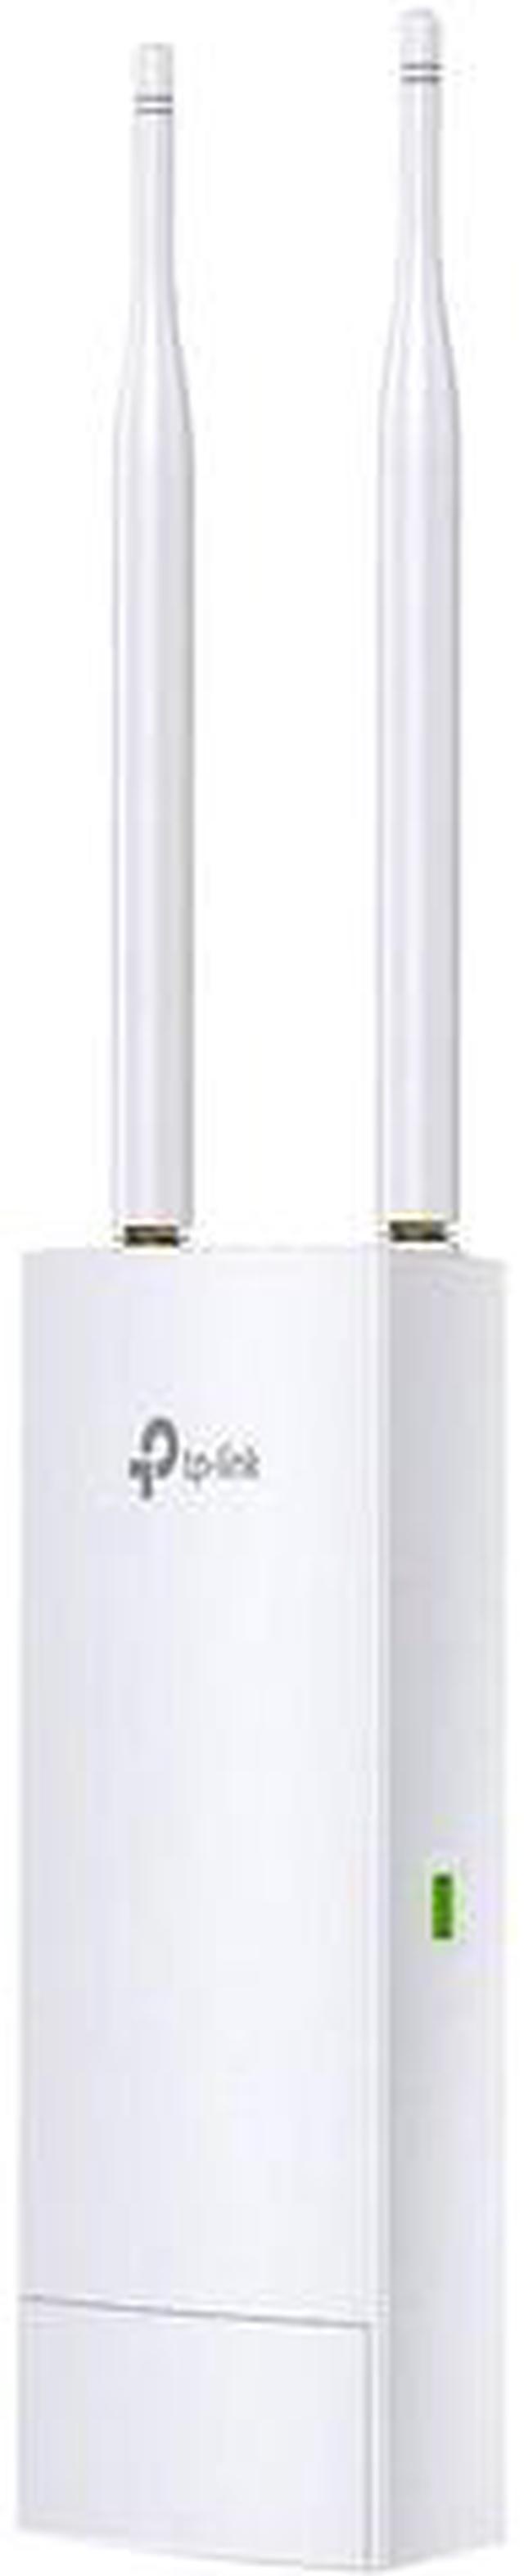 TP-Link EAP110 N300 N Wireless Outdoor Access Point